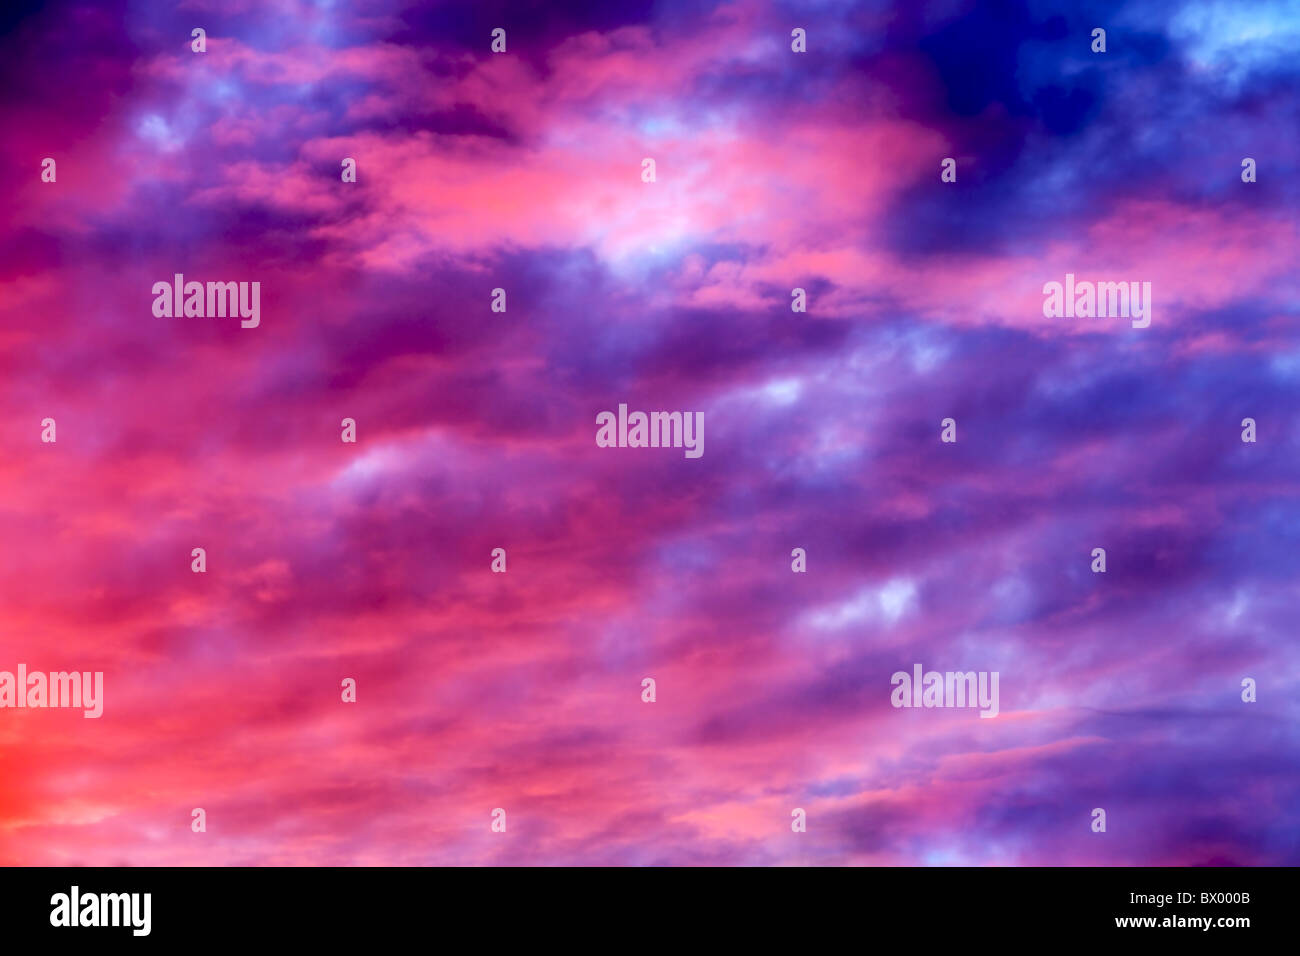 Great sunset sky with clouds all possible shades of pink and purple, great nature background. Stock Photo